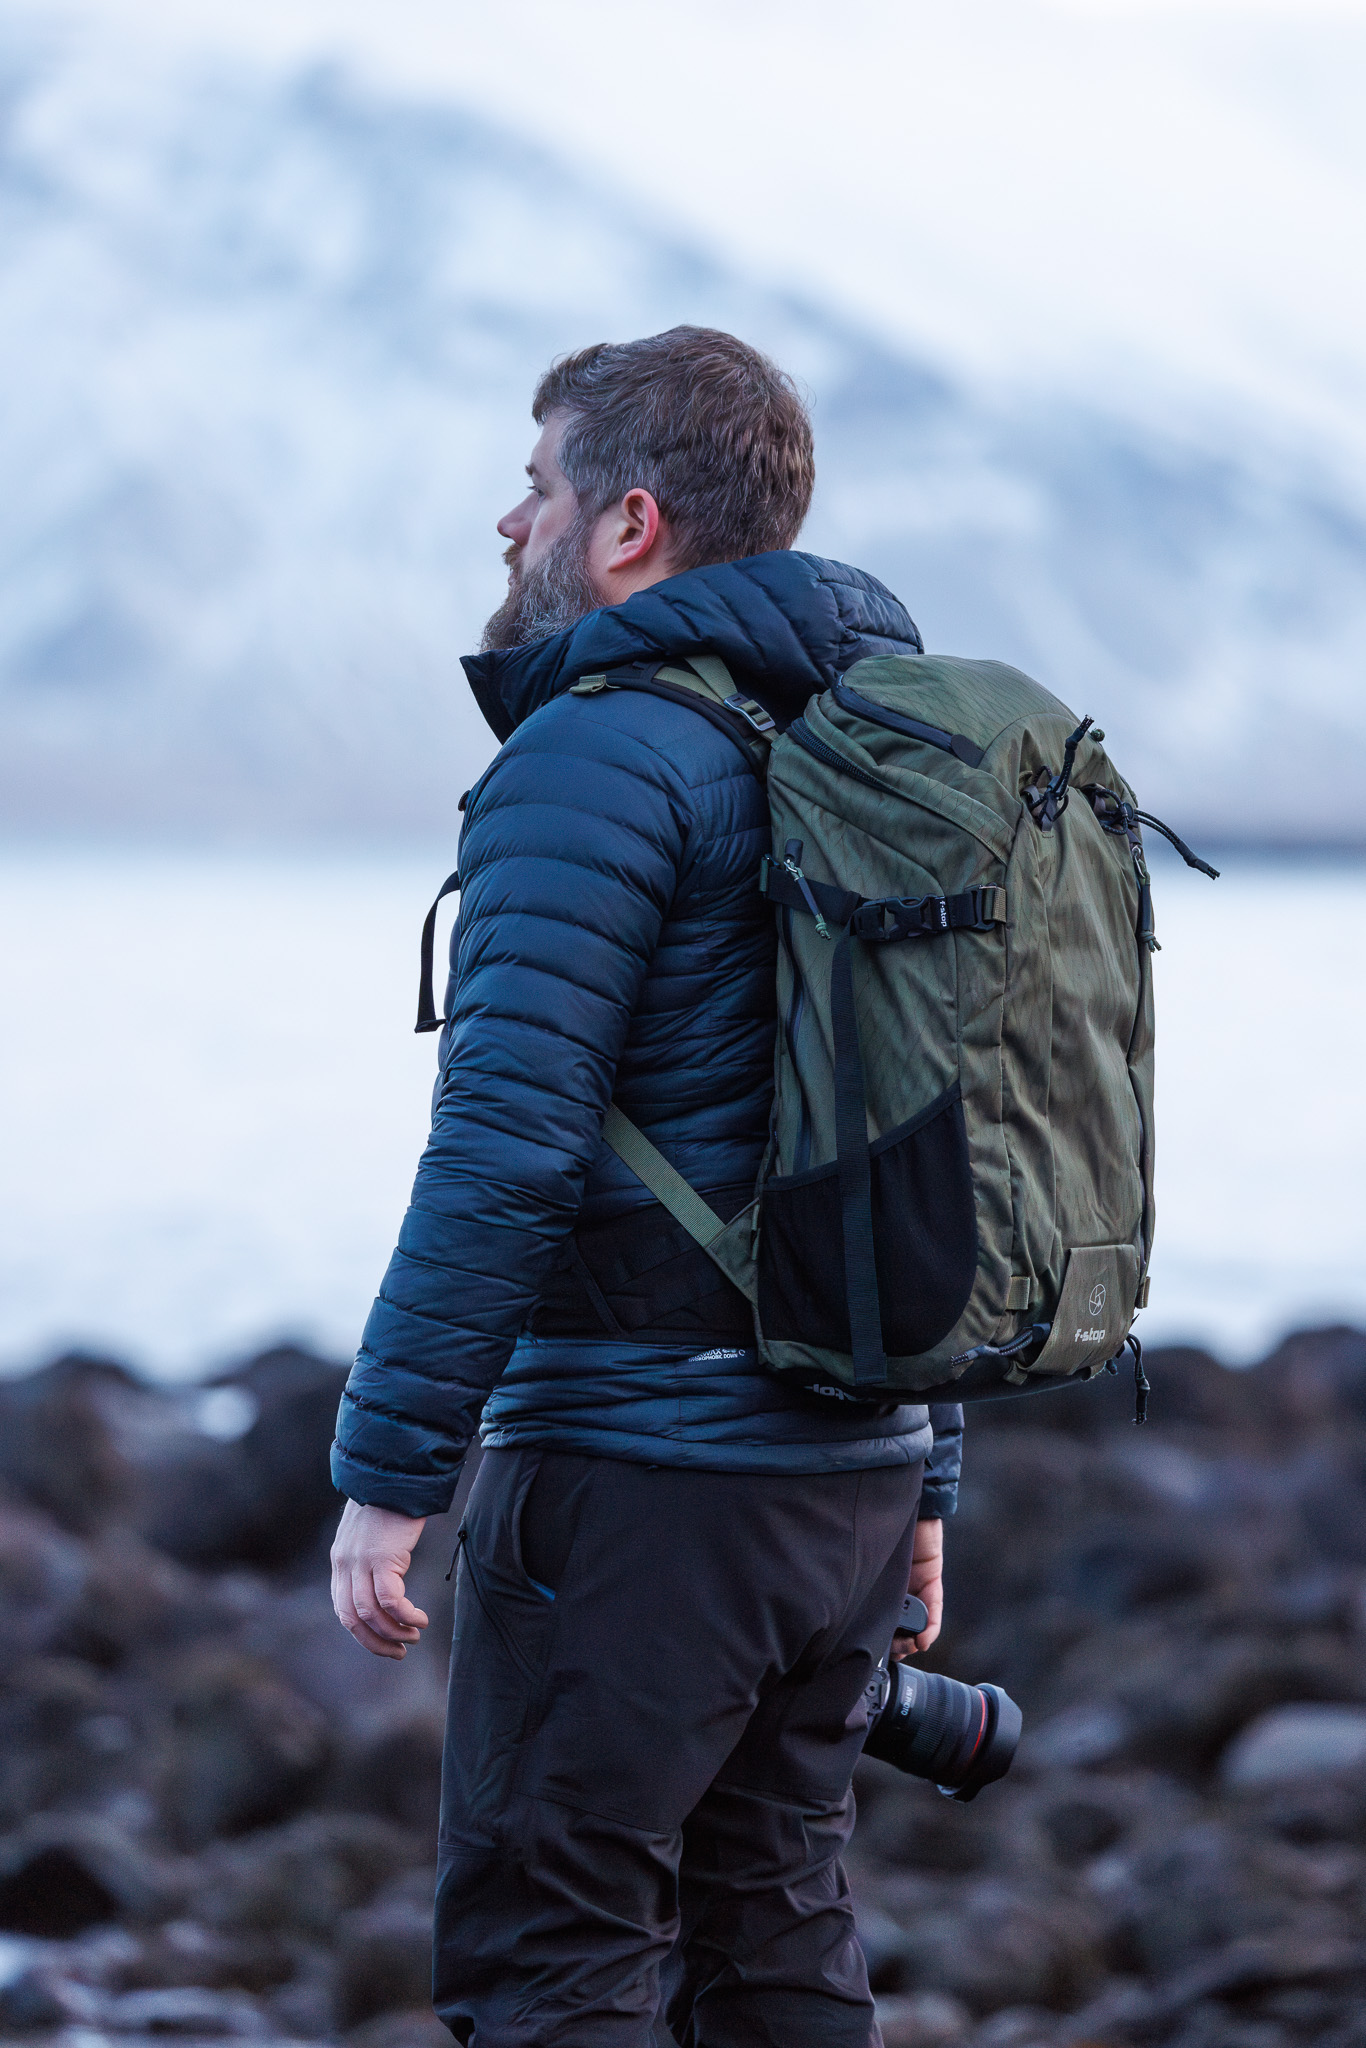 Review - f-stop Ajna DuraDiamond Photography Backpack